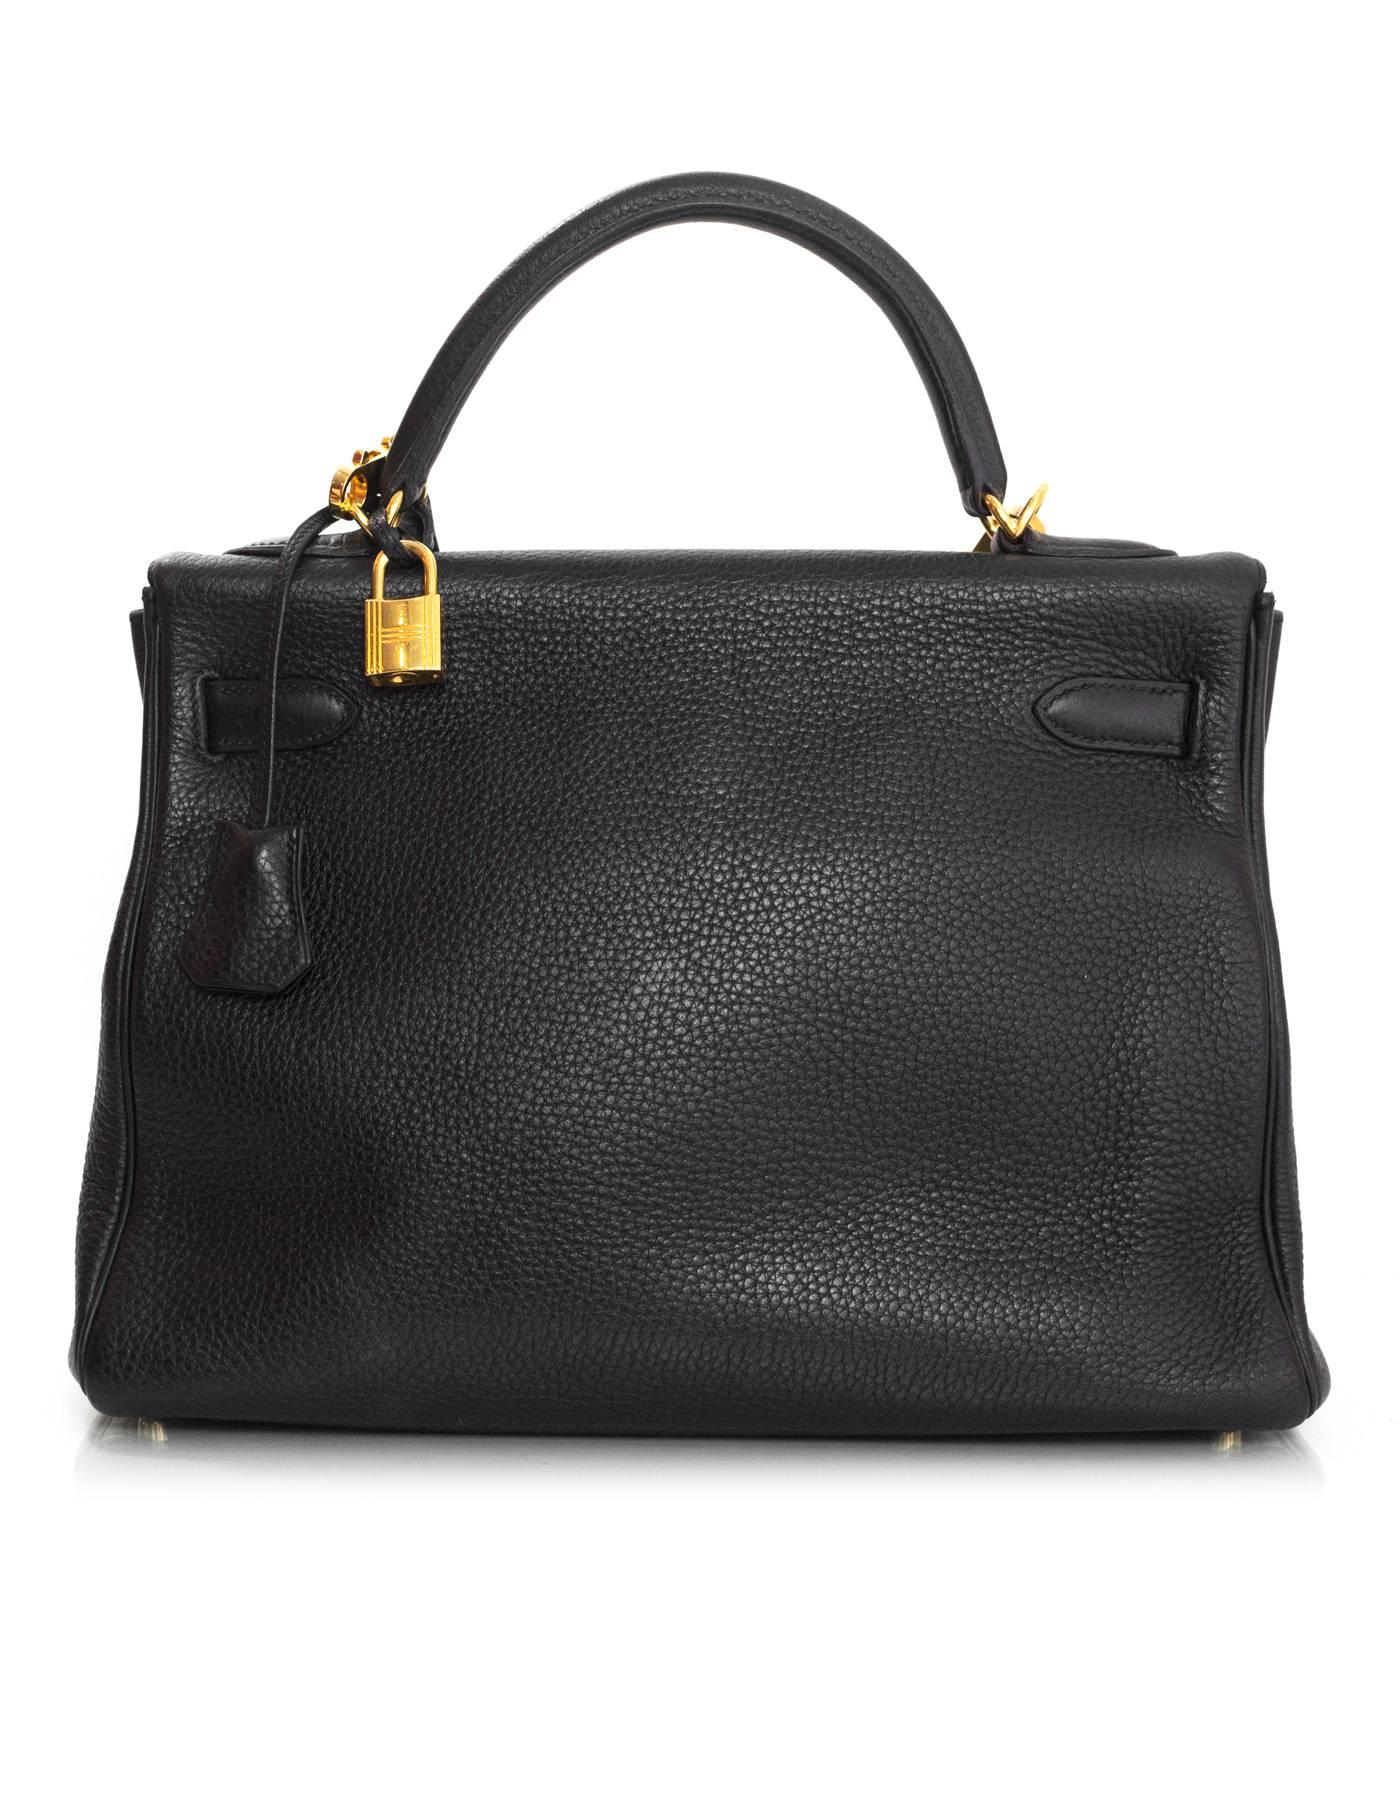 Hermes Black Togo Leather 32cm Retourne Kelly Bag w/ Box In Excellent Condition In New York, NY